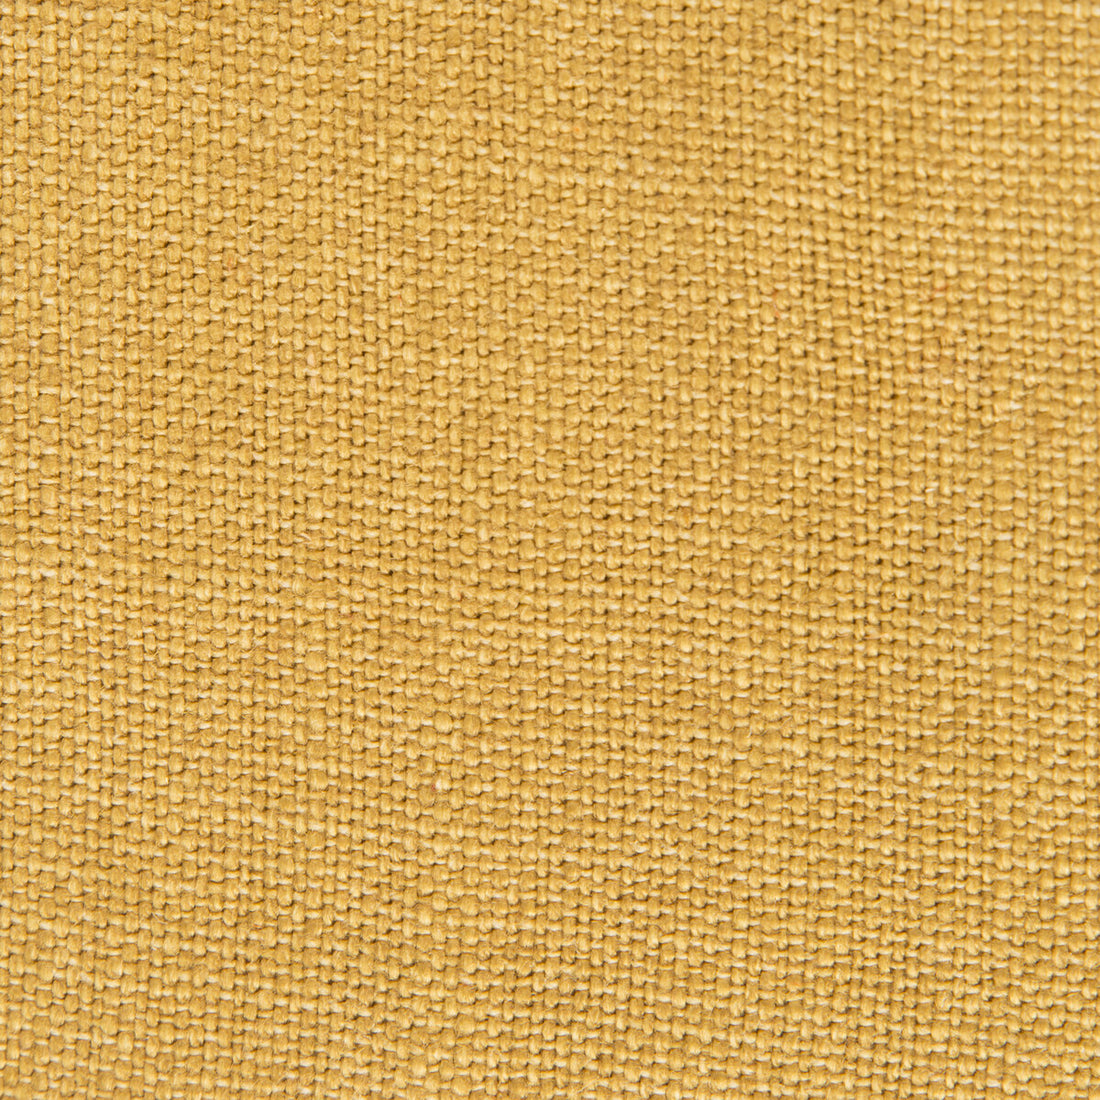 Nicaragua fabric in oro viejo color - pattern GDT5239.010.0 - by Gaston y Daniela in the Basics collection